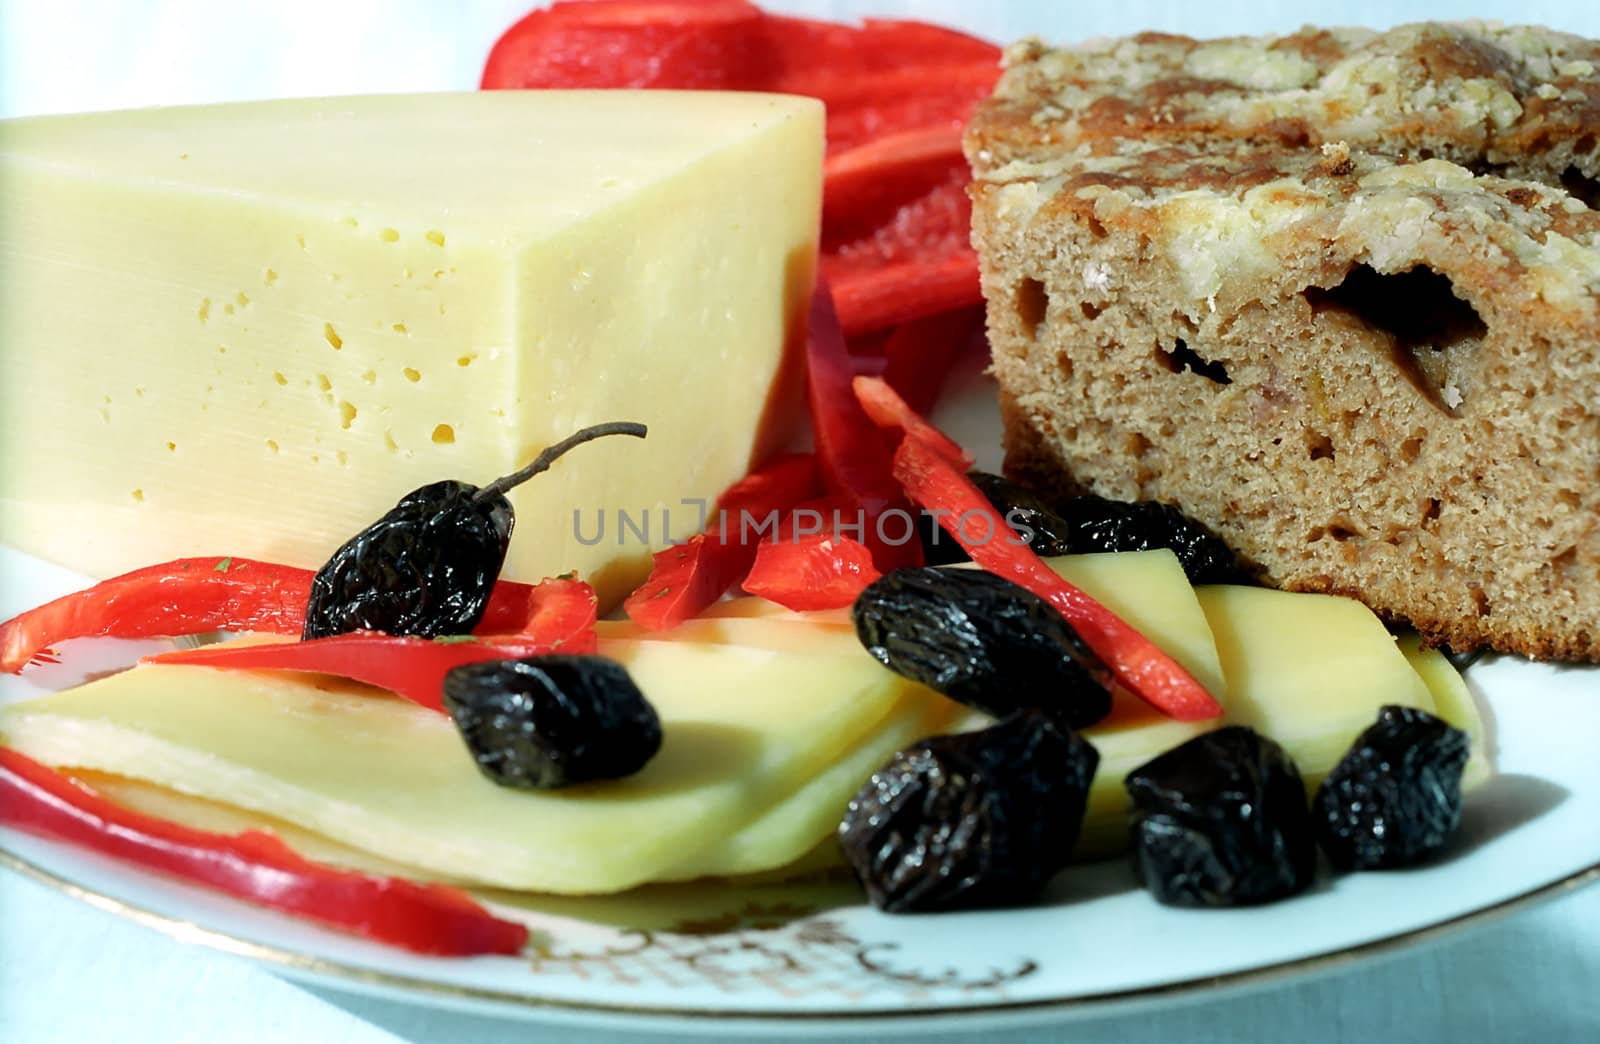 Cheese, black olives, red paprika and farm bread on the plate